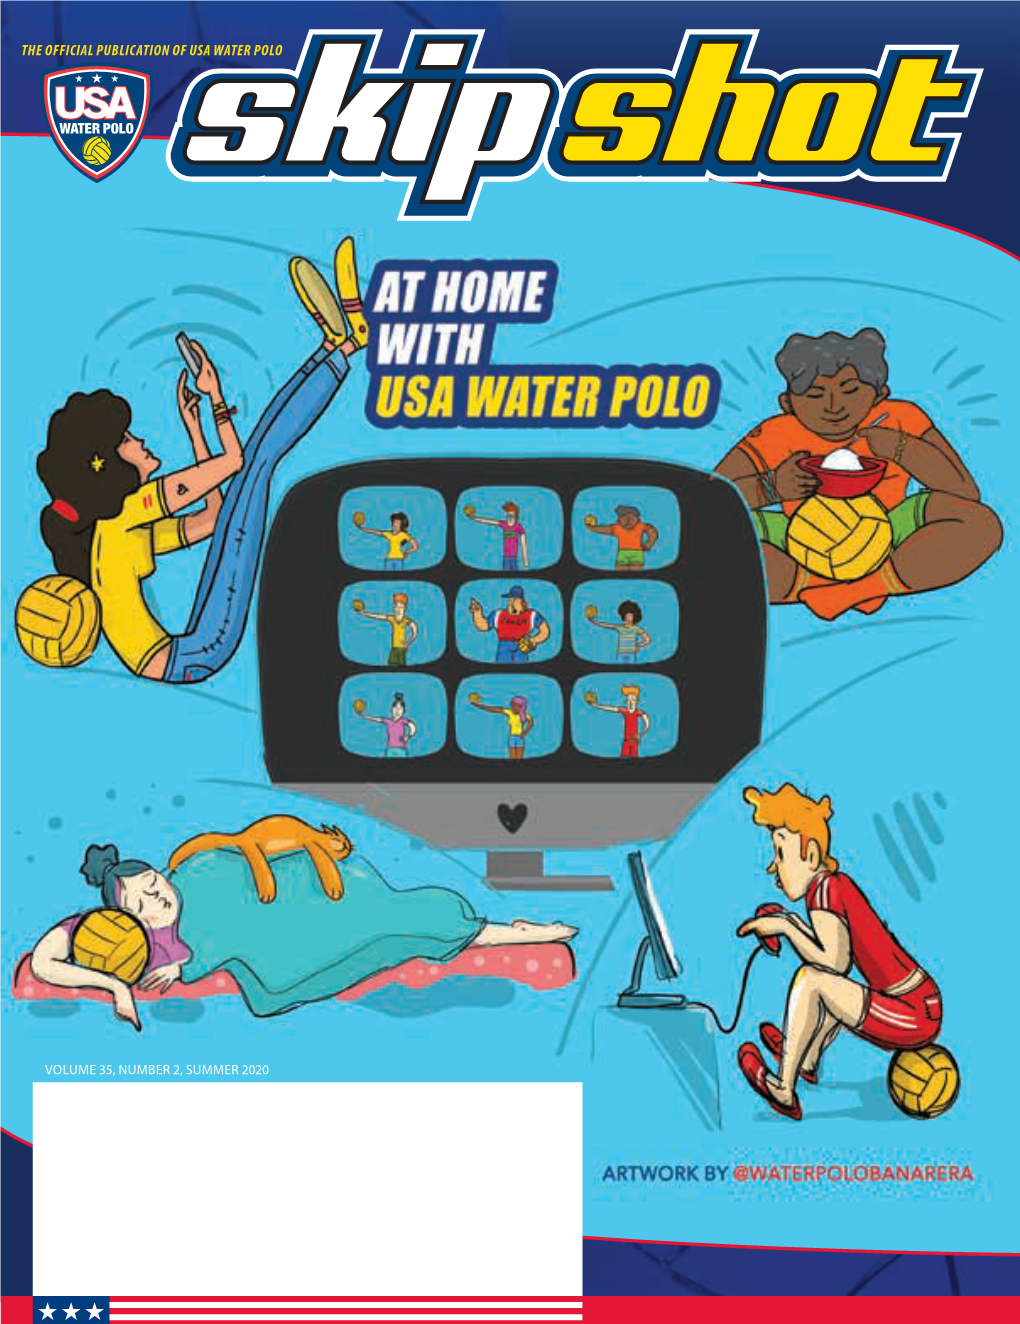 The Official Publication of Usa Water Polo